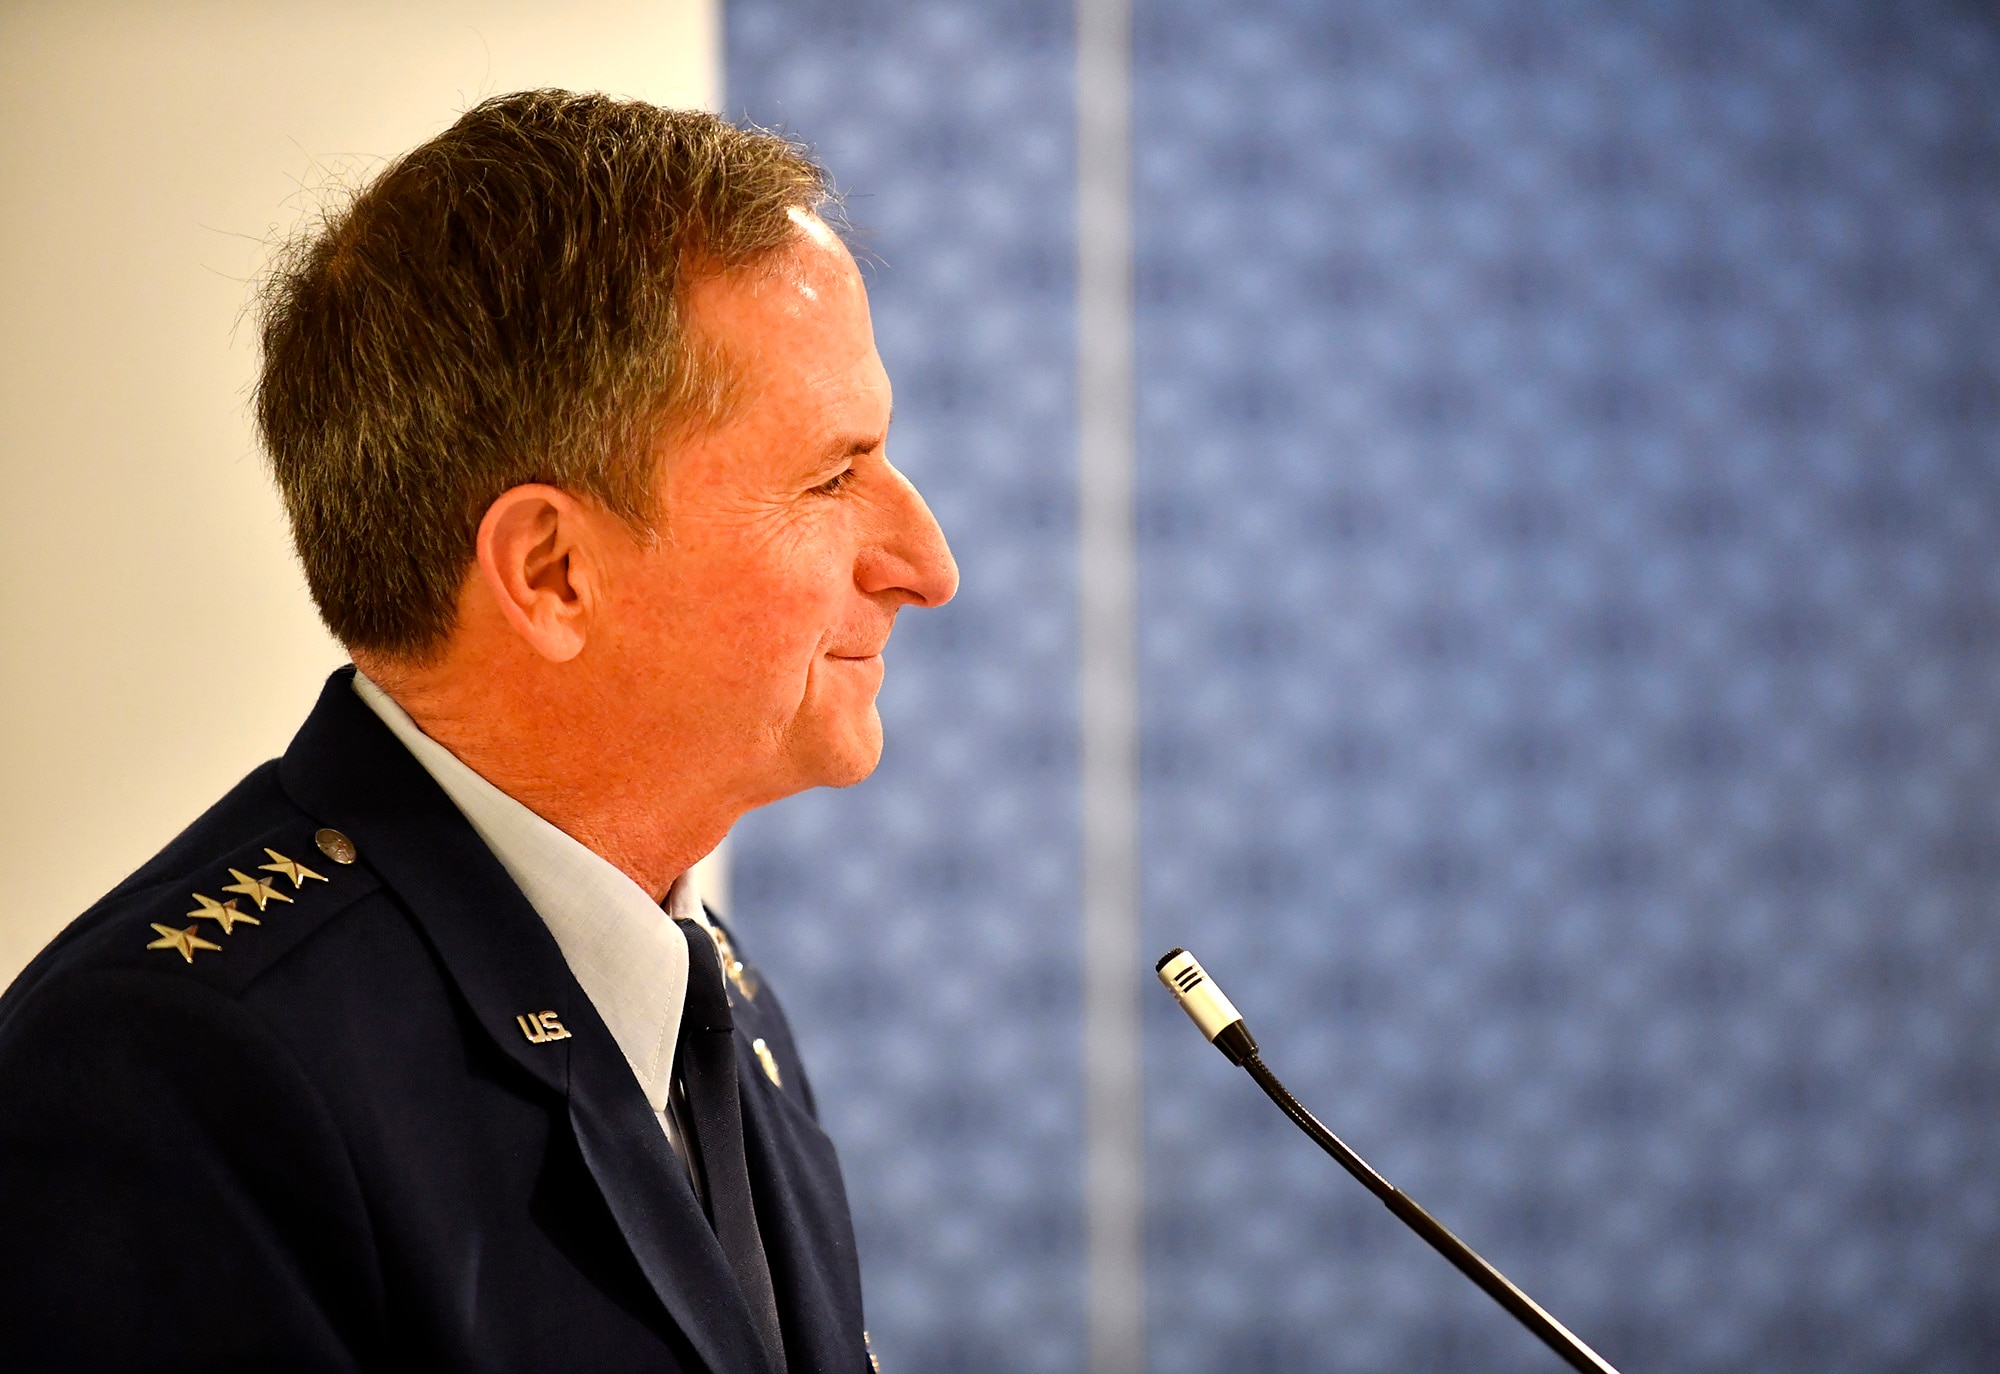 Chief of Staff of the Air Force Gen. David L. Goldfein speaks during the Gen. Lew Allen Jr. award ceremony at the Pentagon, Arlington, Va., April 27, 2018. The annual award, named after the 10th CSAF, recognizes the accomplishments of base-level officers and senior NCOs in their performance of aircraft, munitions or missile maintenance. (U.S. Air Force photo by Staff Sgt. Rusty Frank)